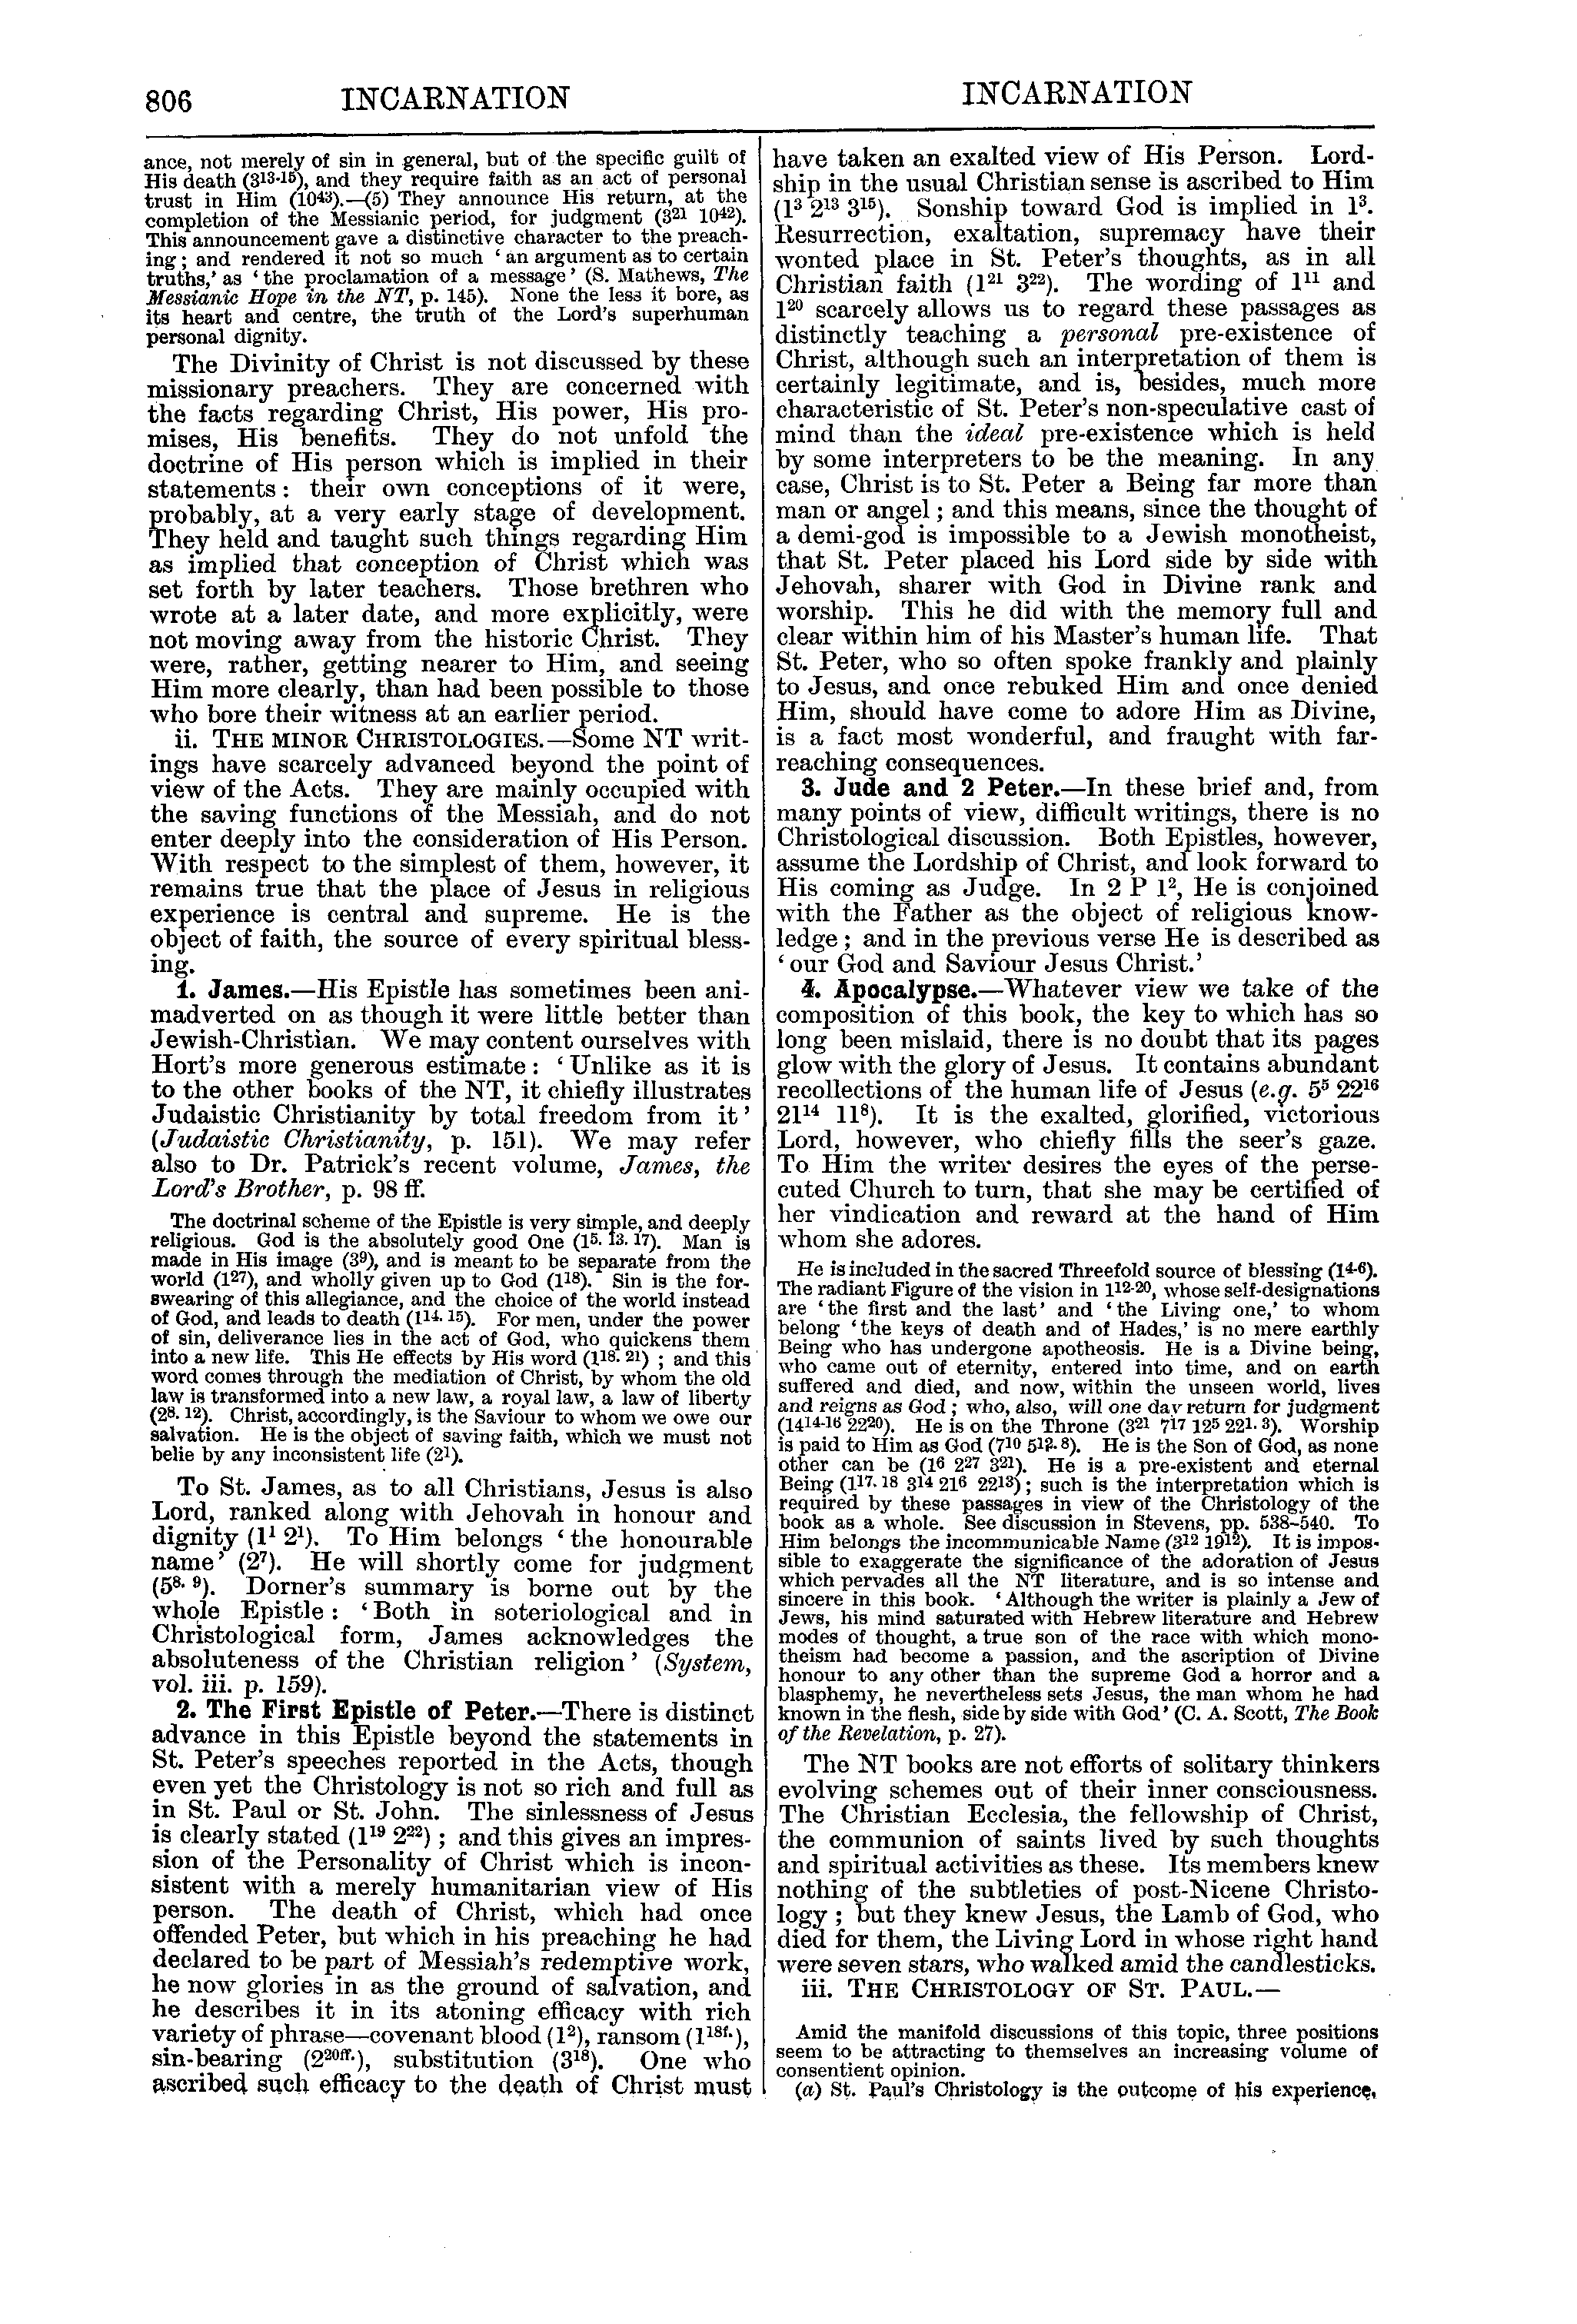 Image of page 806